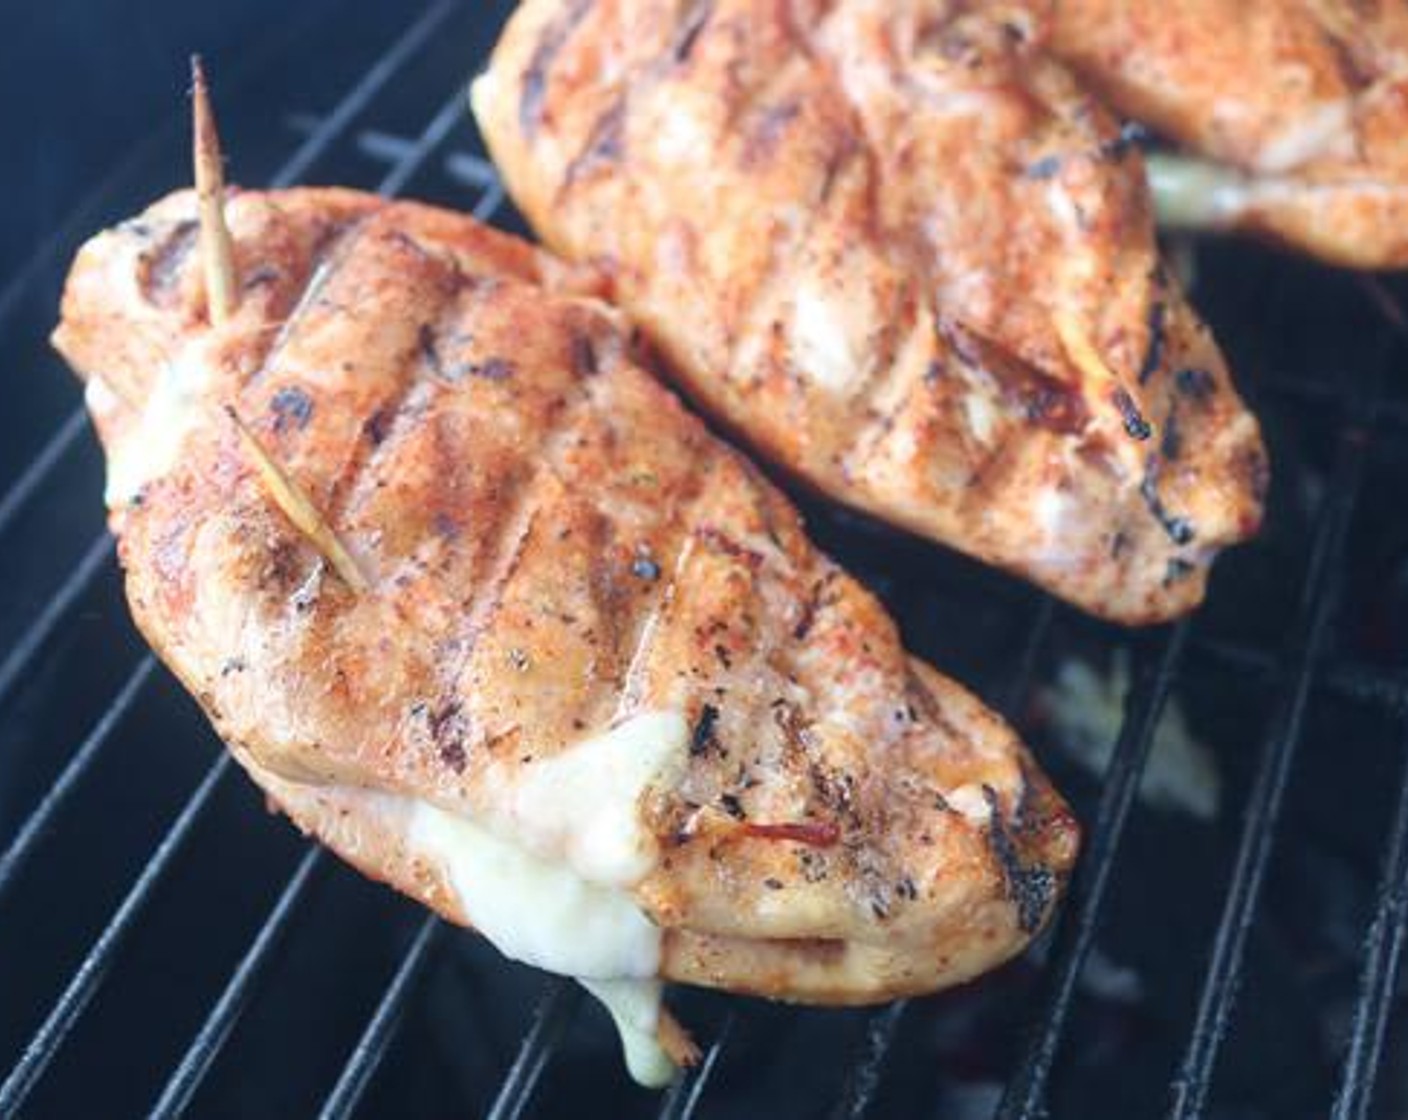 step 6 Place each breast on the cool side of the grill for 20-25 minutes. Use a probe thermometer to monitor the internal temperature.